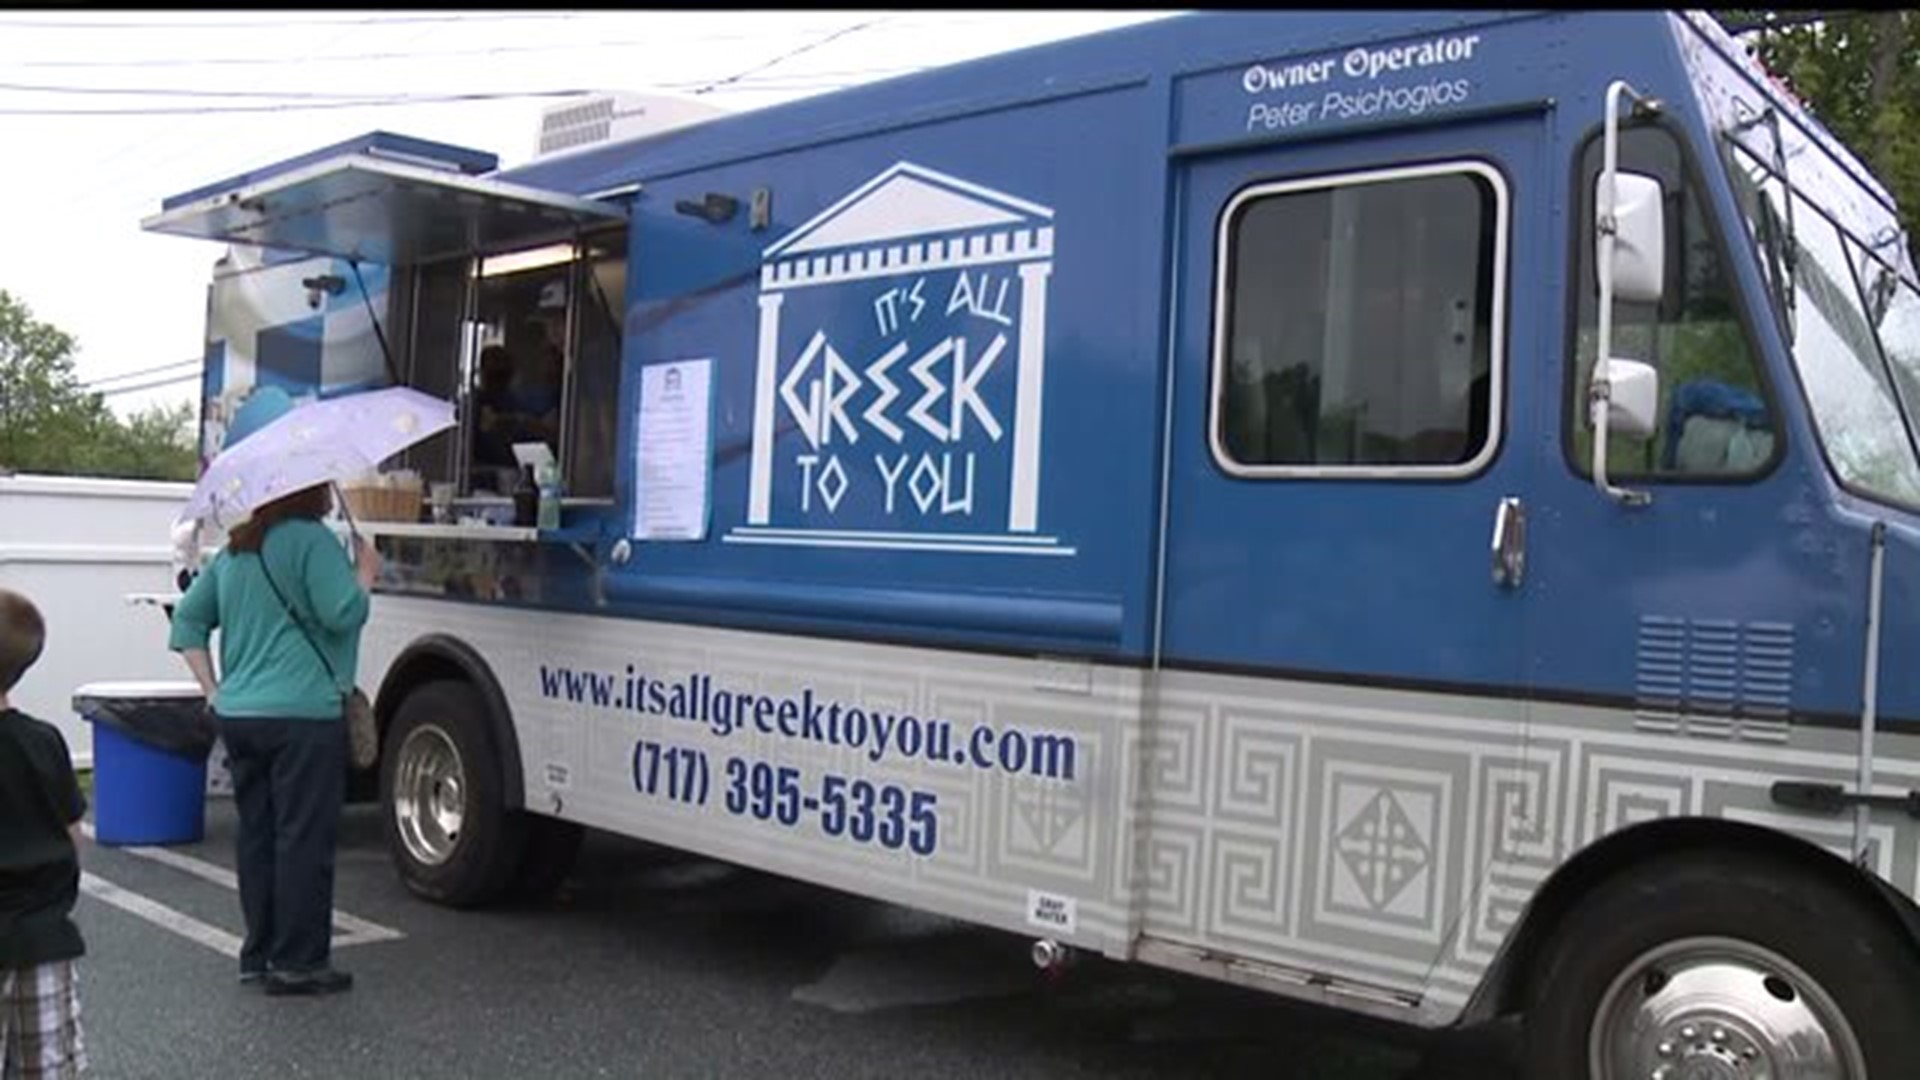 Food Truck Festival comes to Linglestown